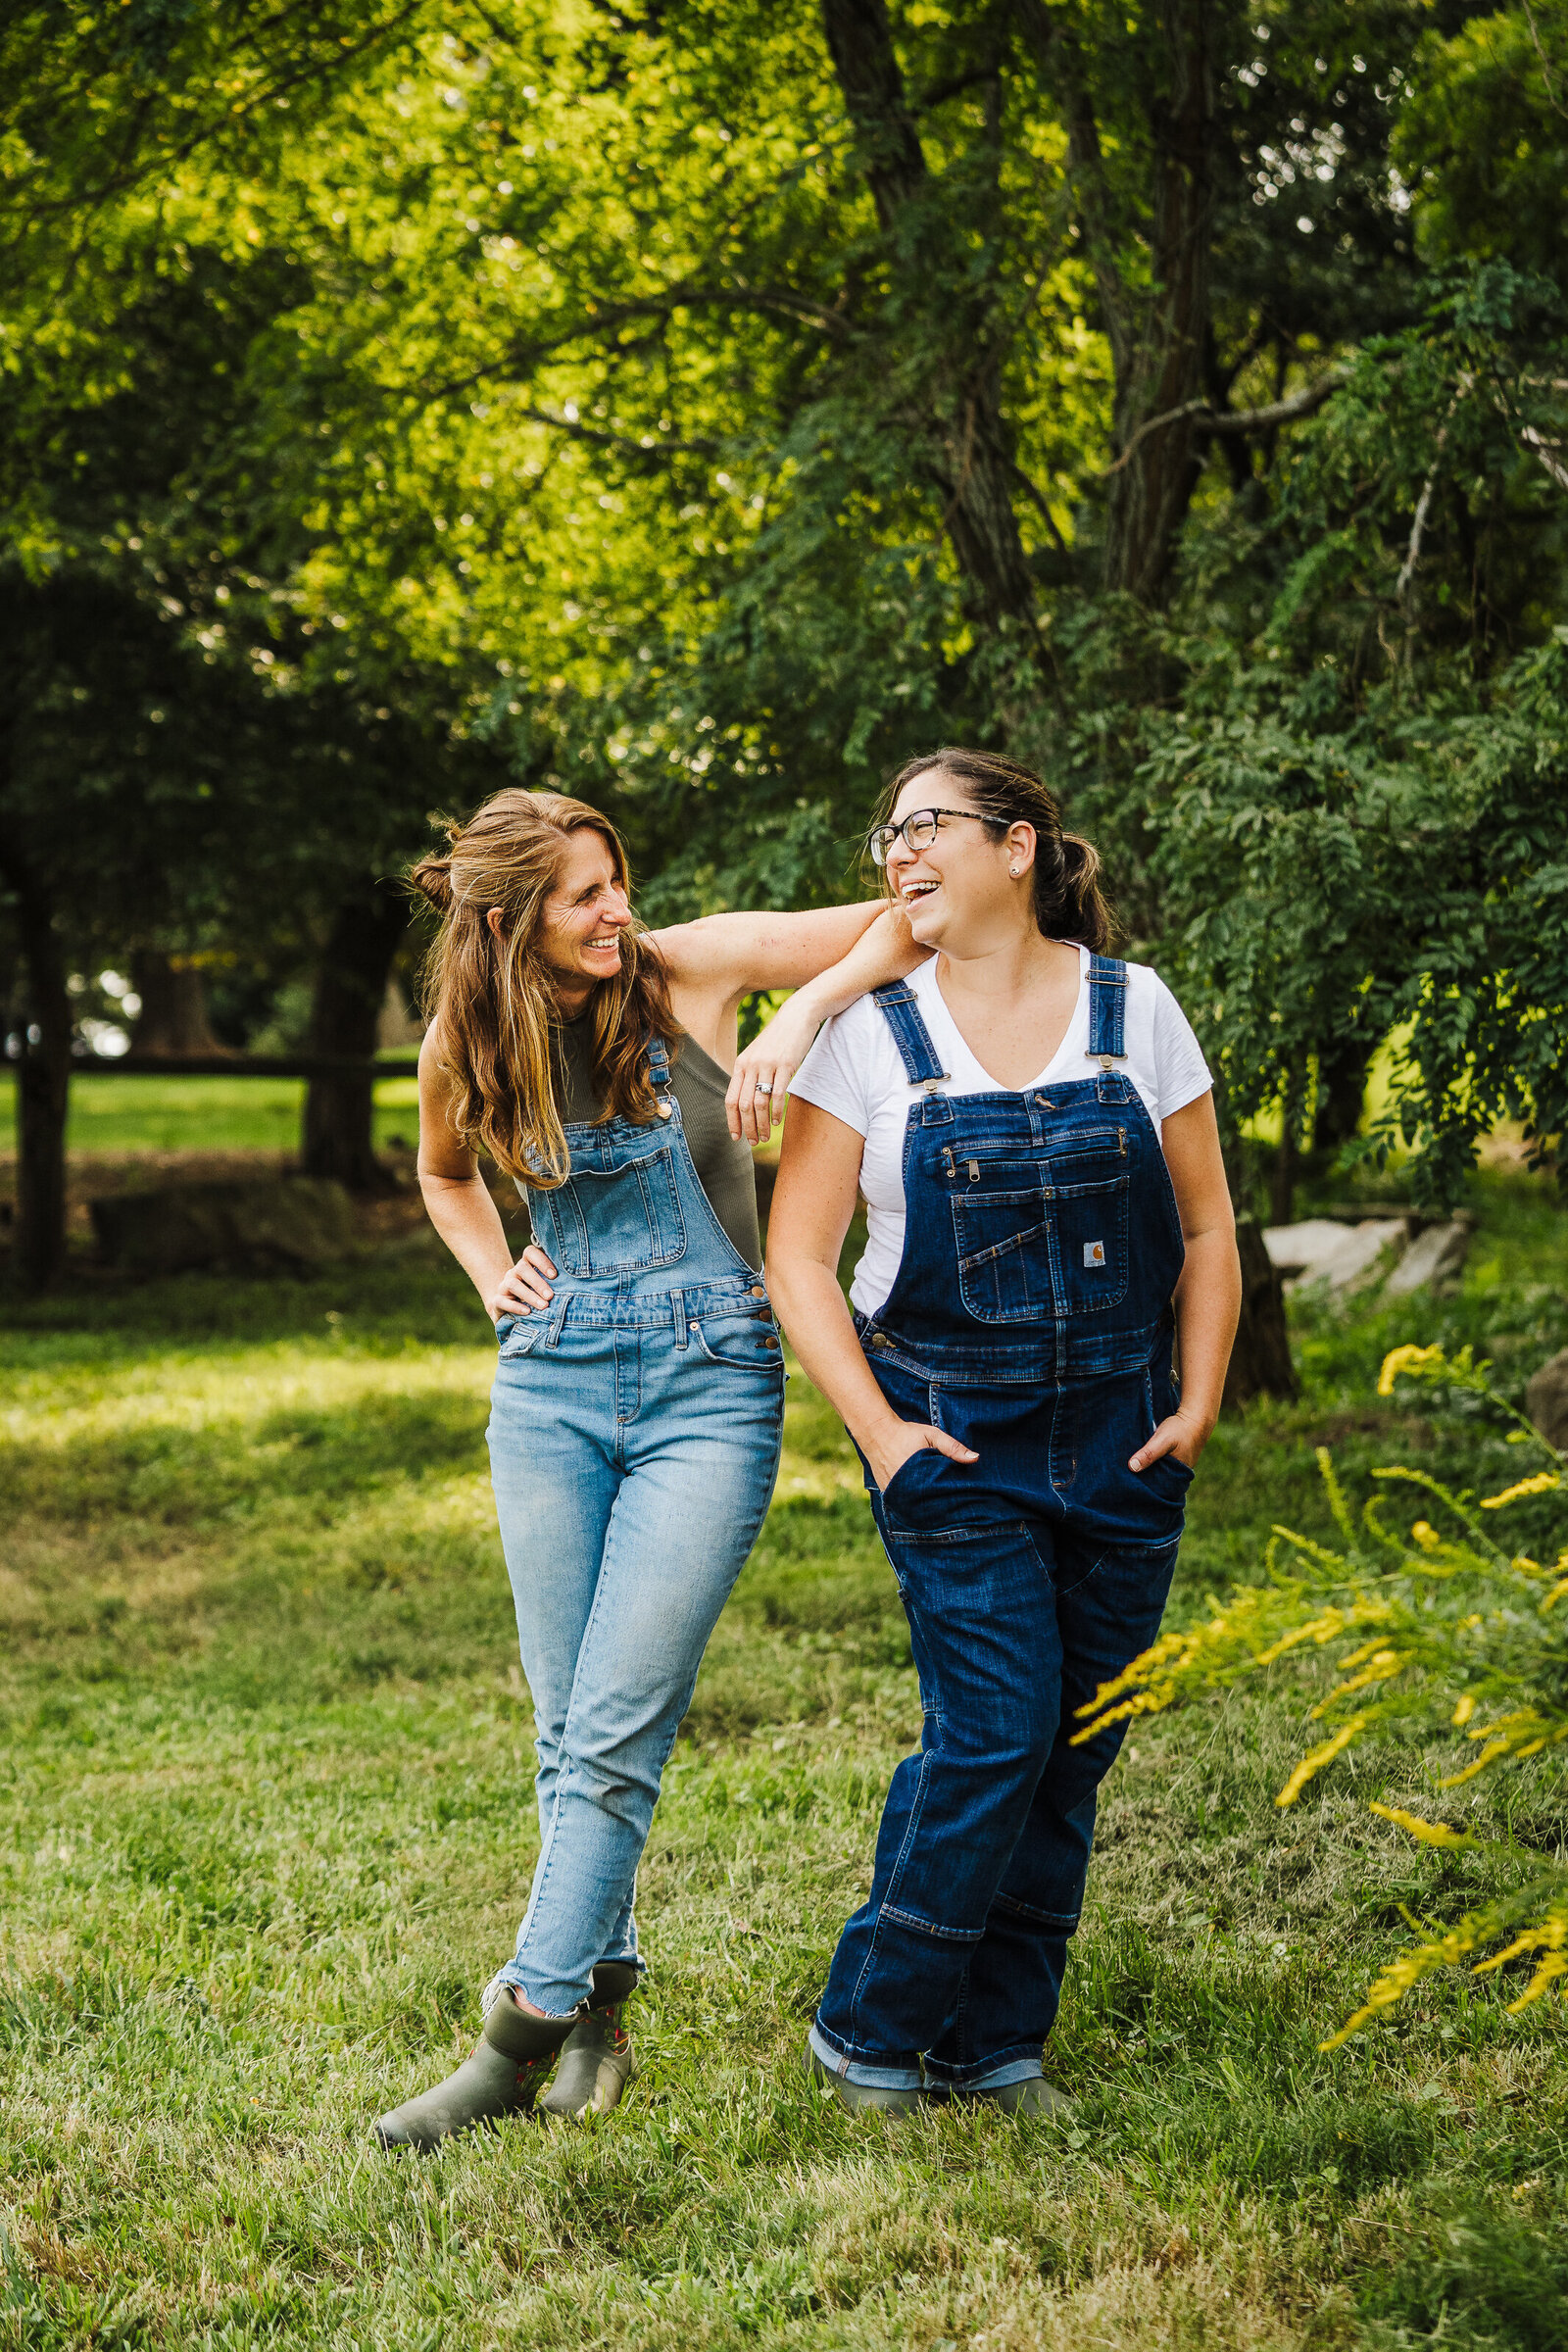 two gardeners in overalls laugh together outdoors